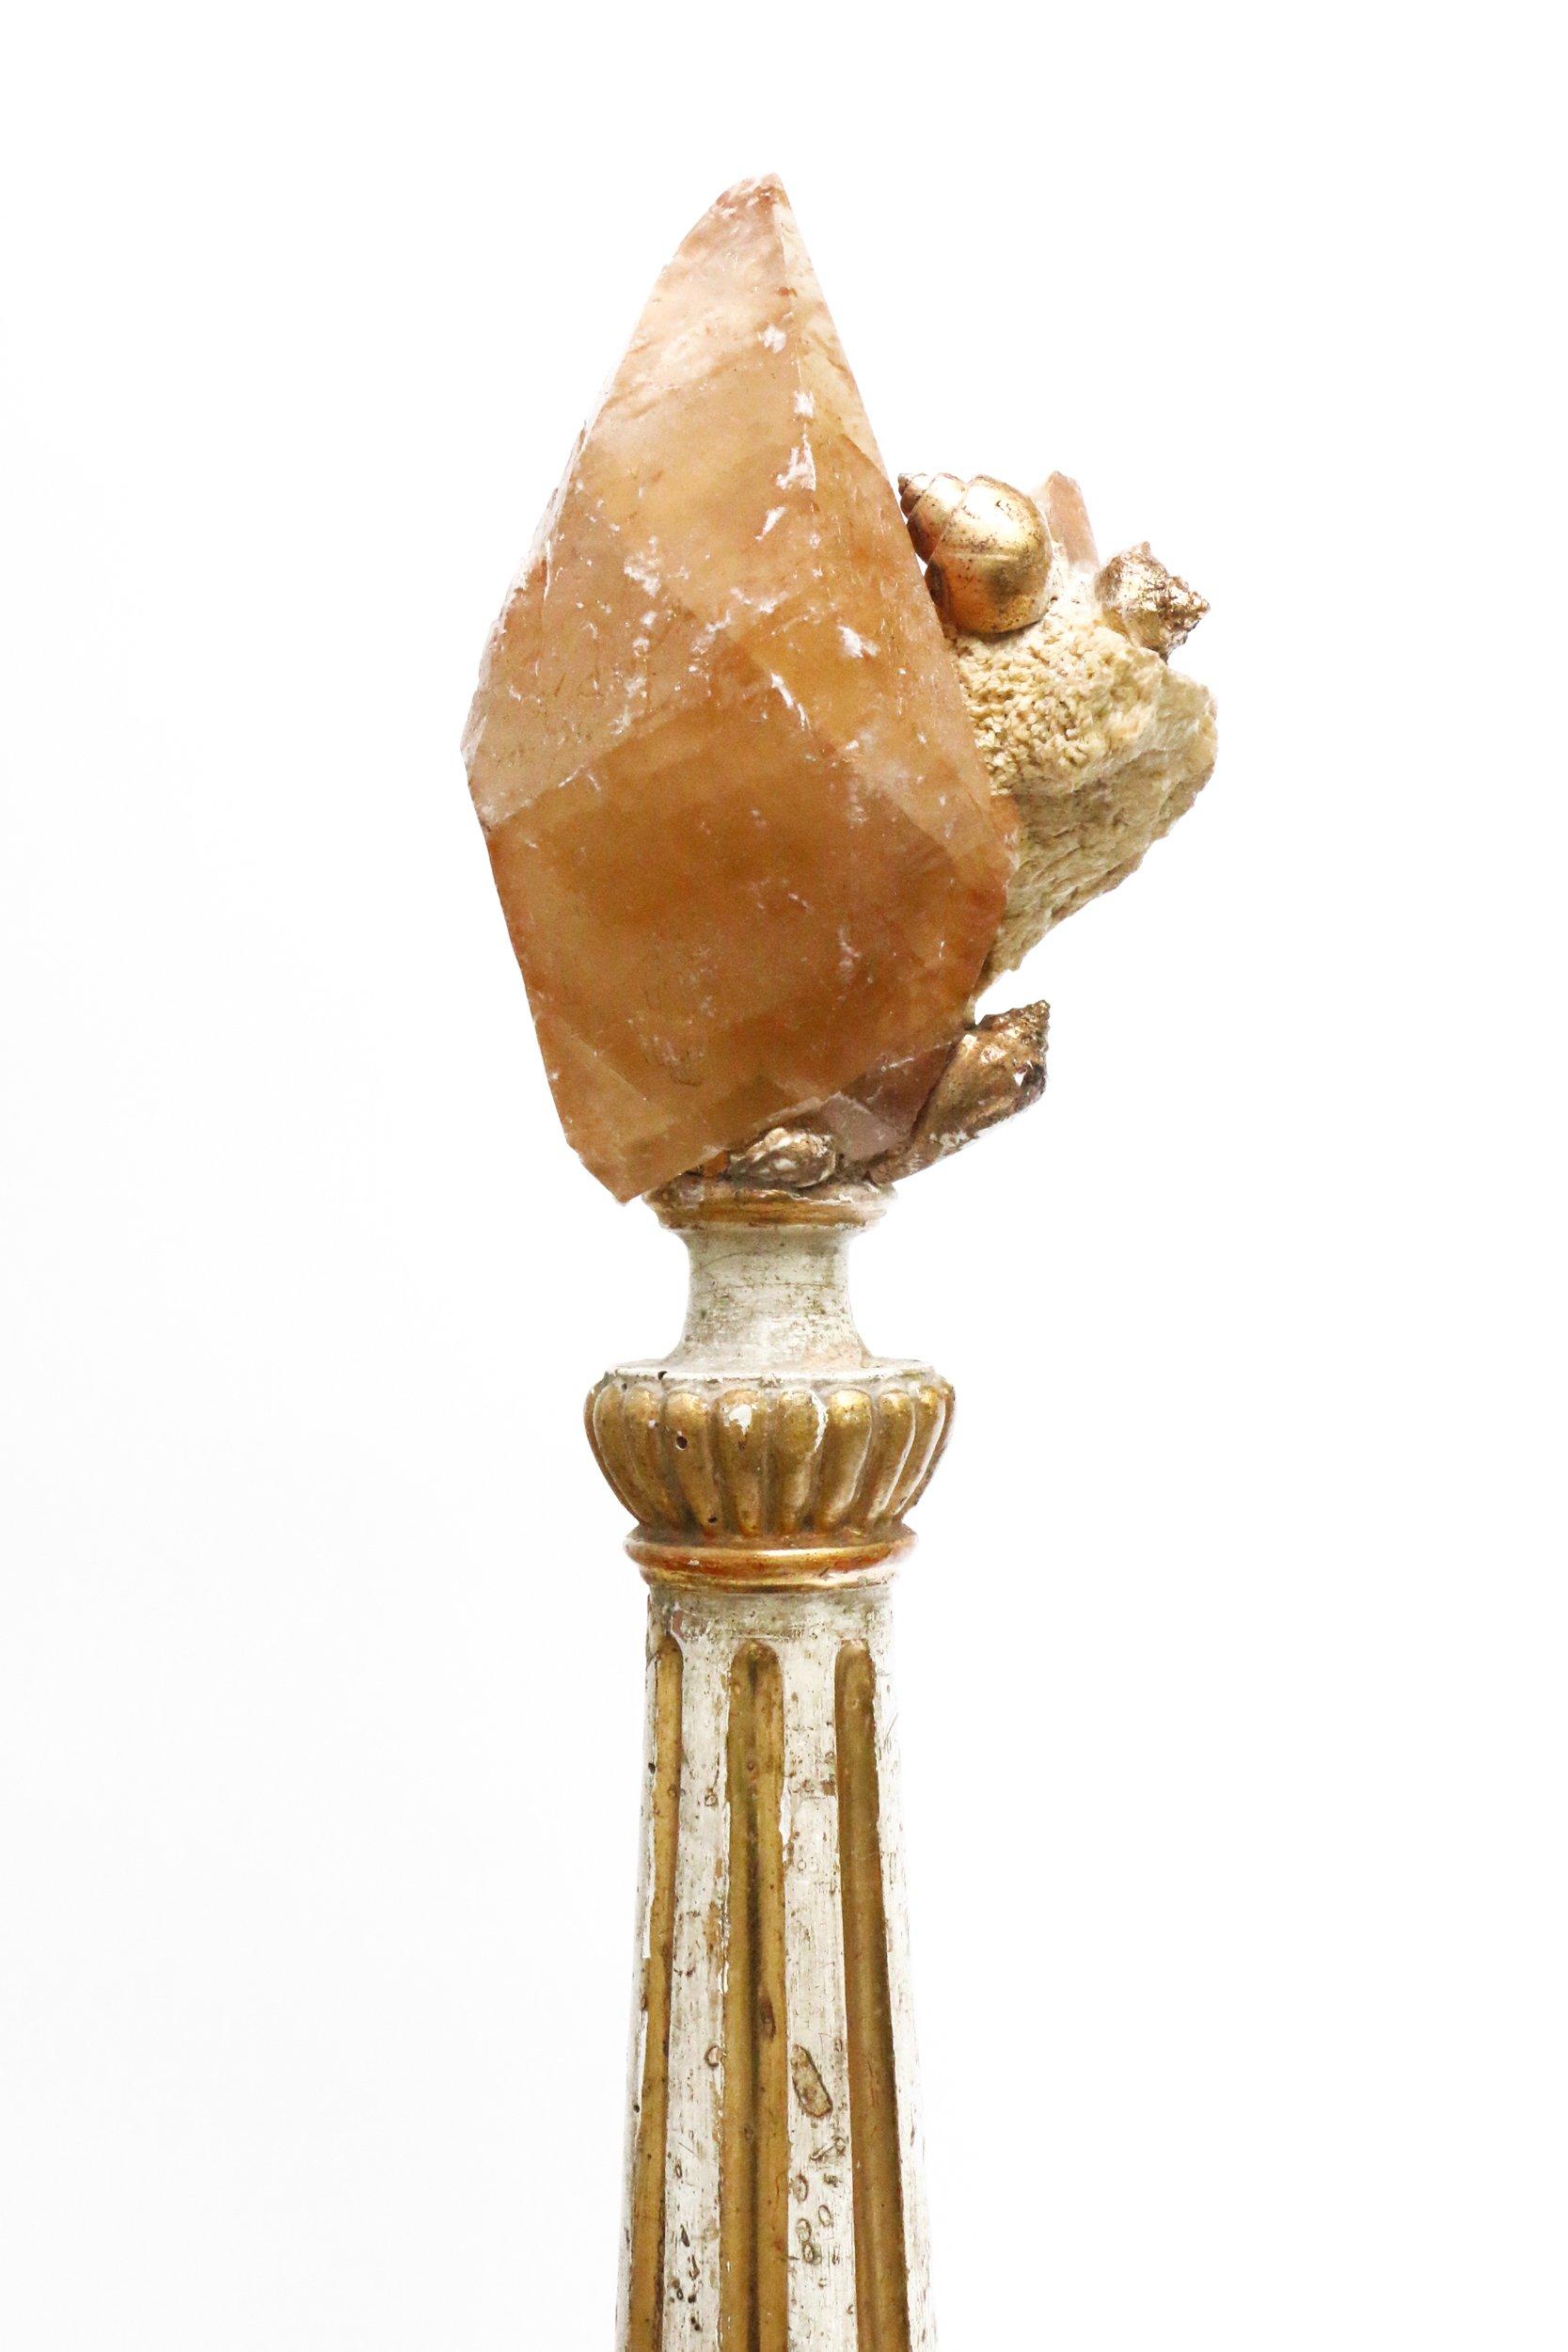 18th century Italian (Region of Liguria) wood candlestick decorated with a calcite crystal in matrix, a specimen from the Elmwood Mine, and gold leaf shells. This mine produces some of the most finest crystallized examples of calcite crystals and 